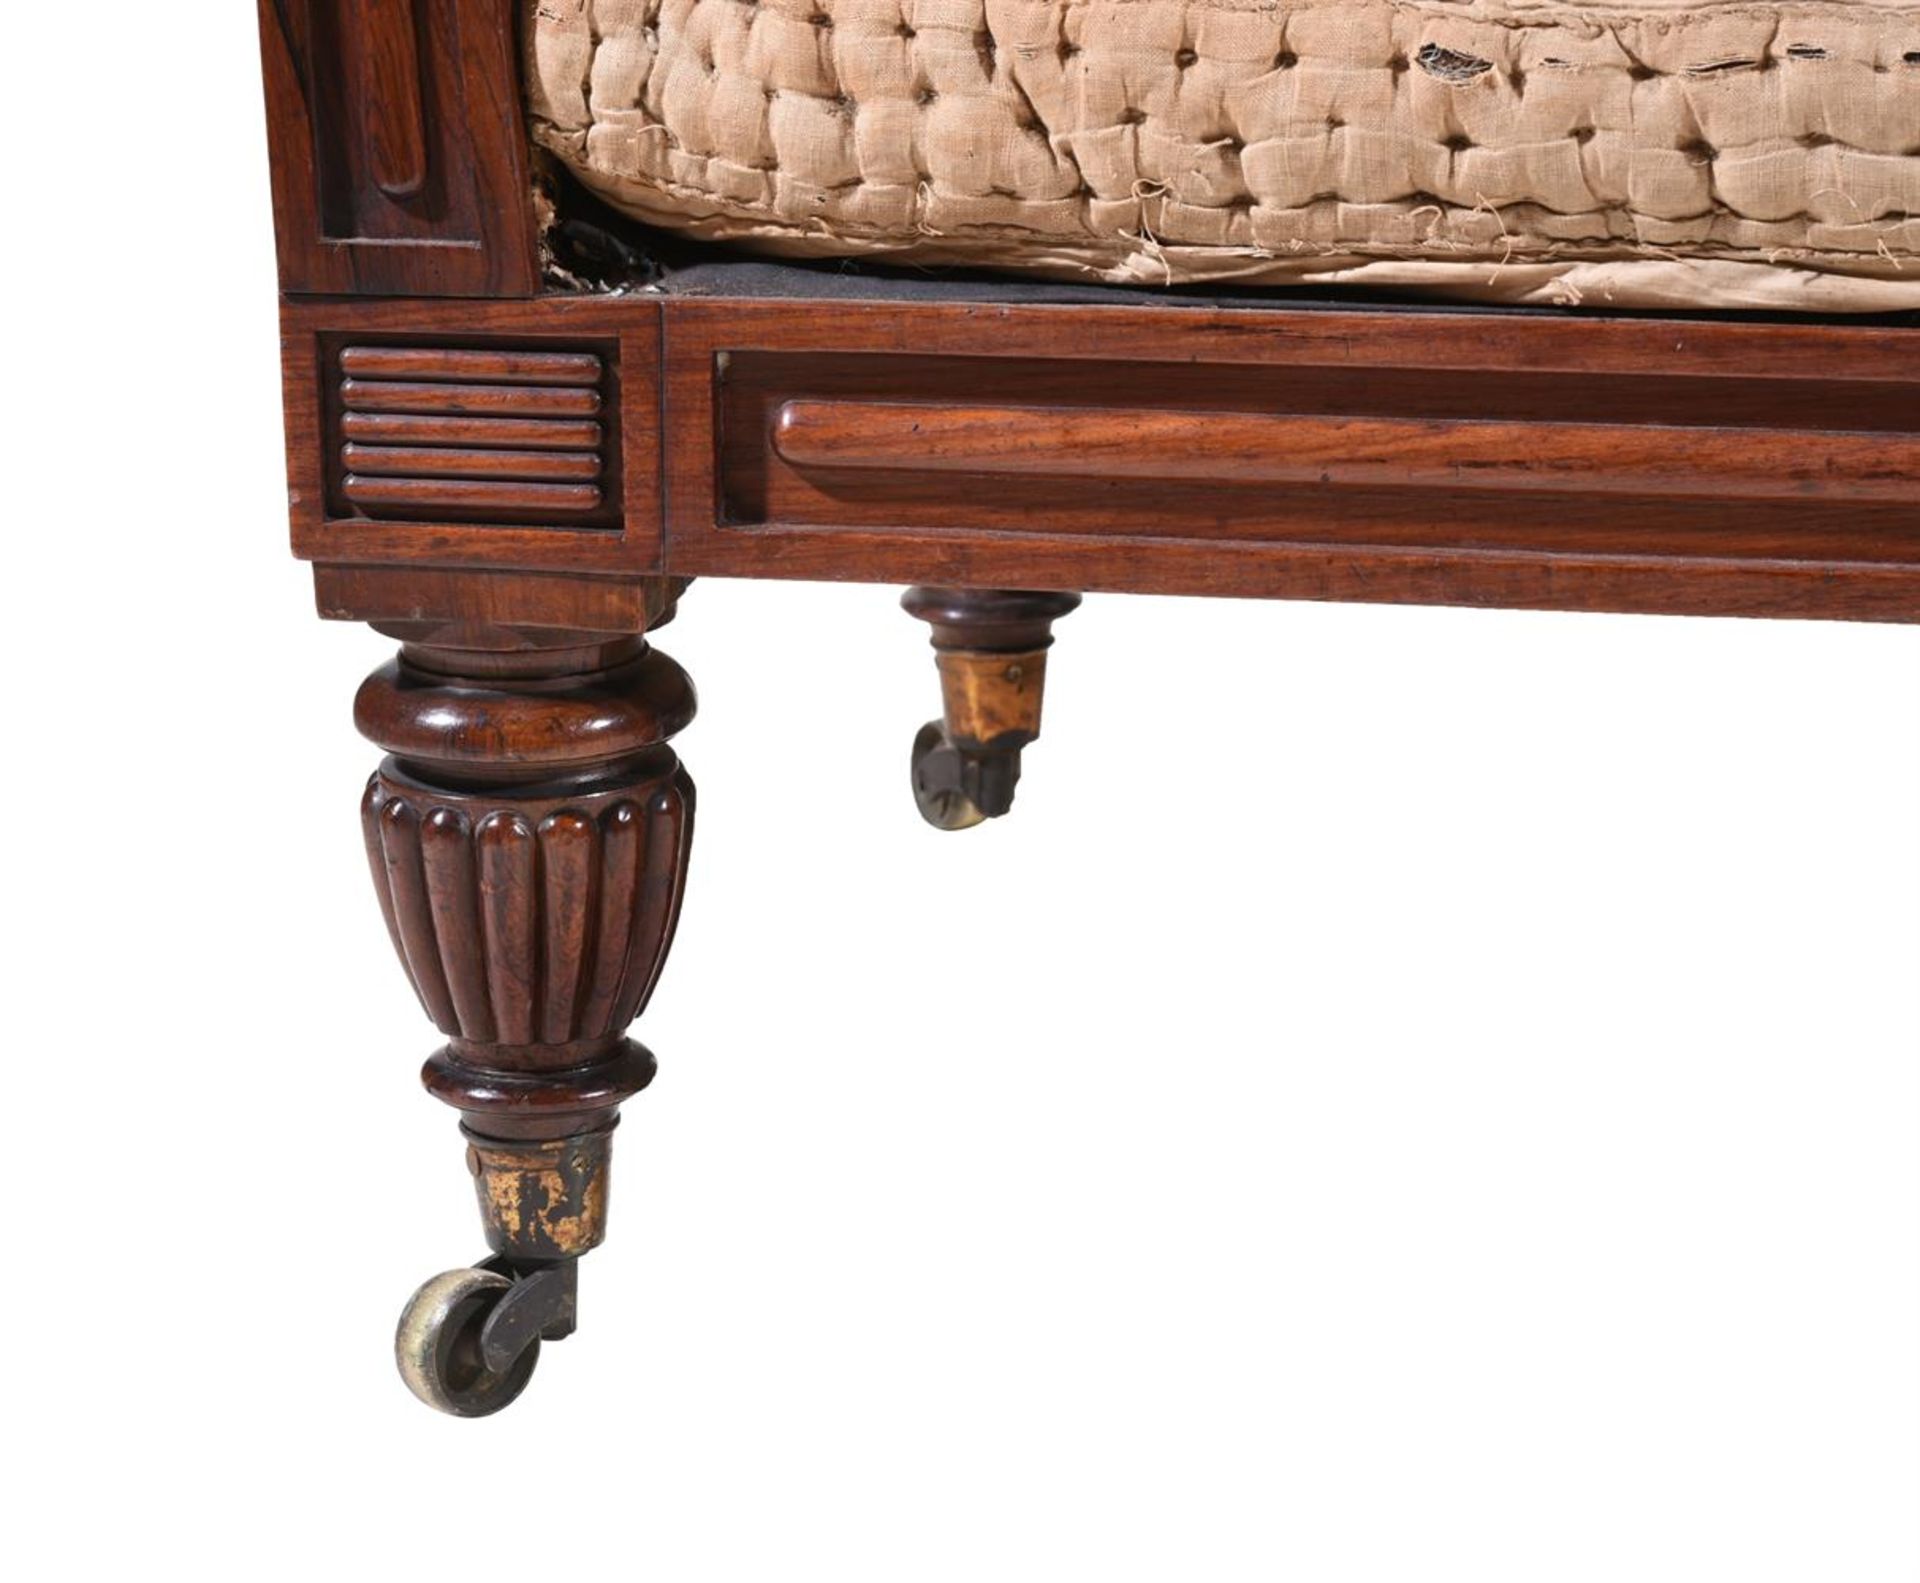 Y A REGENCY ROSEWOOD SOFAIN THE MANNER OF GILLOWS, CIRCA 1820 - Image 3 of 3